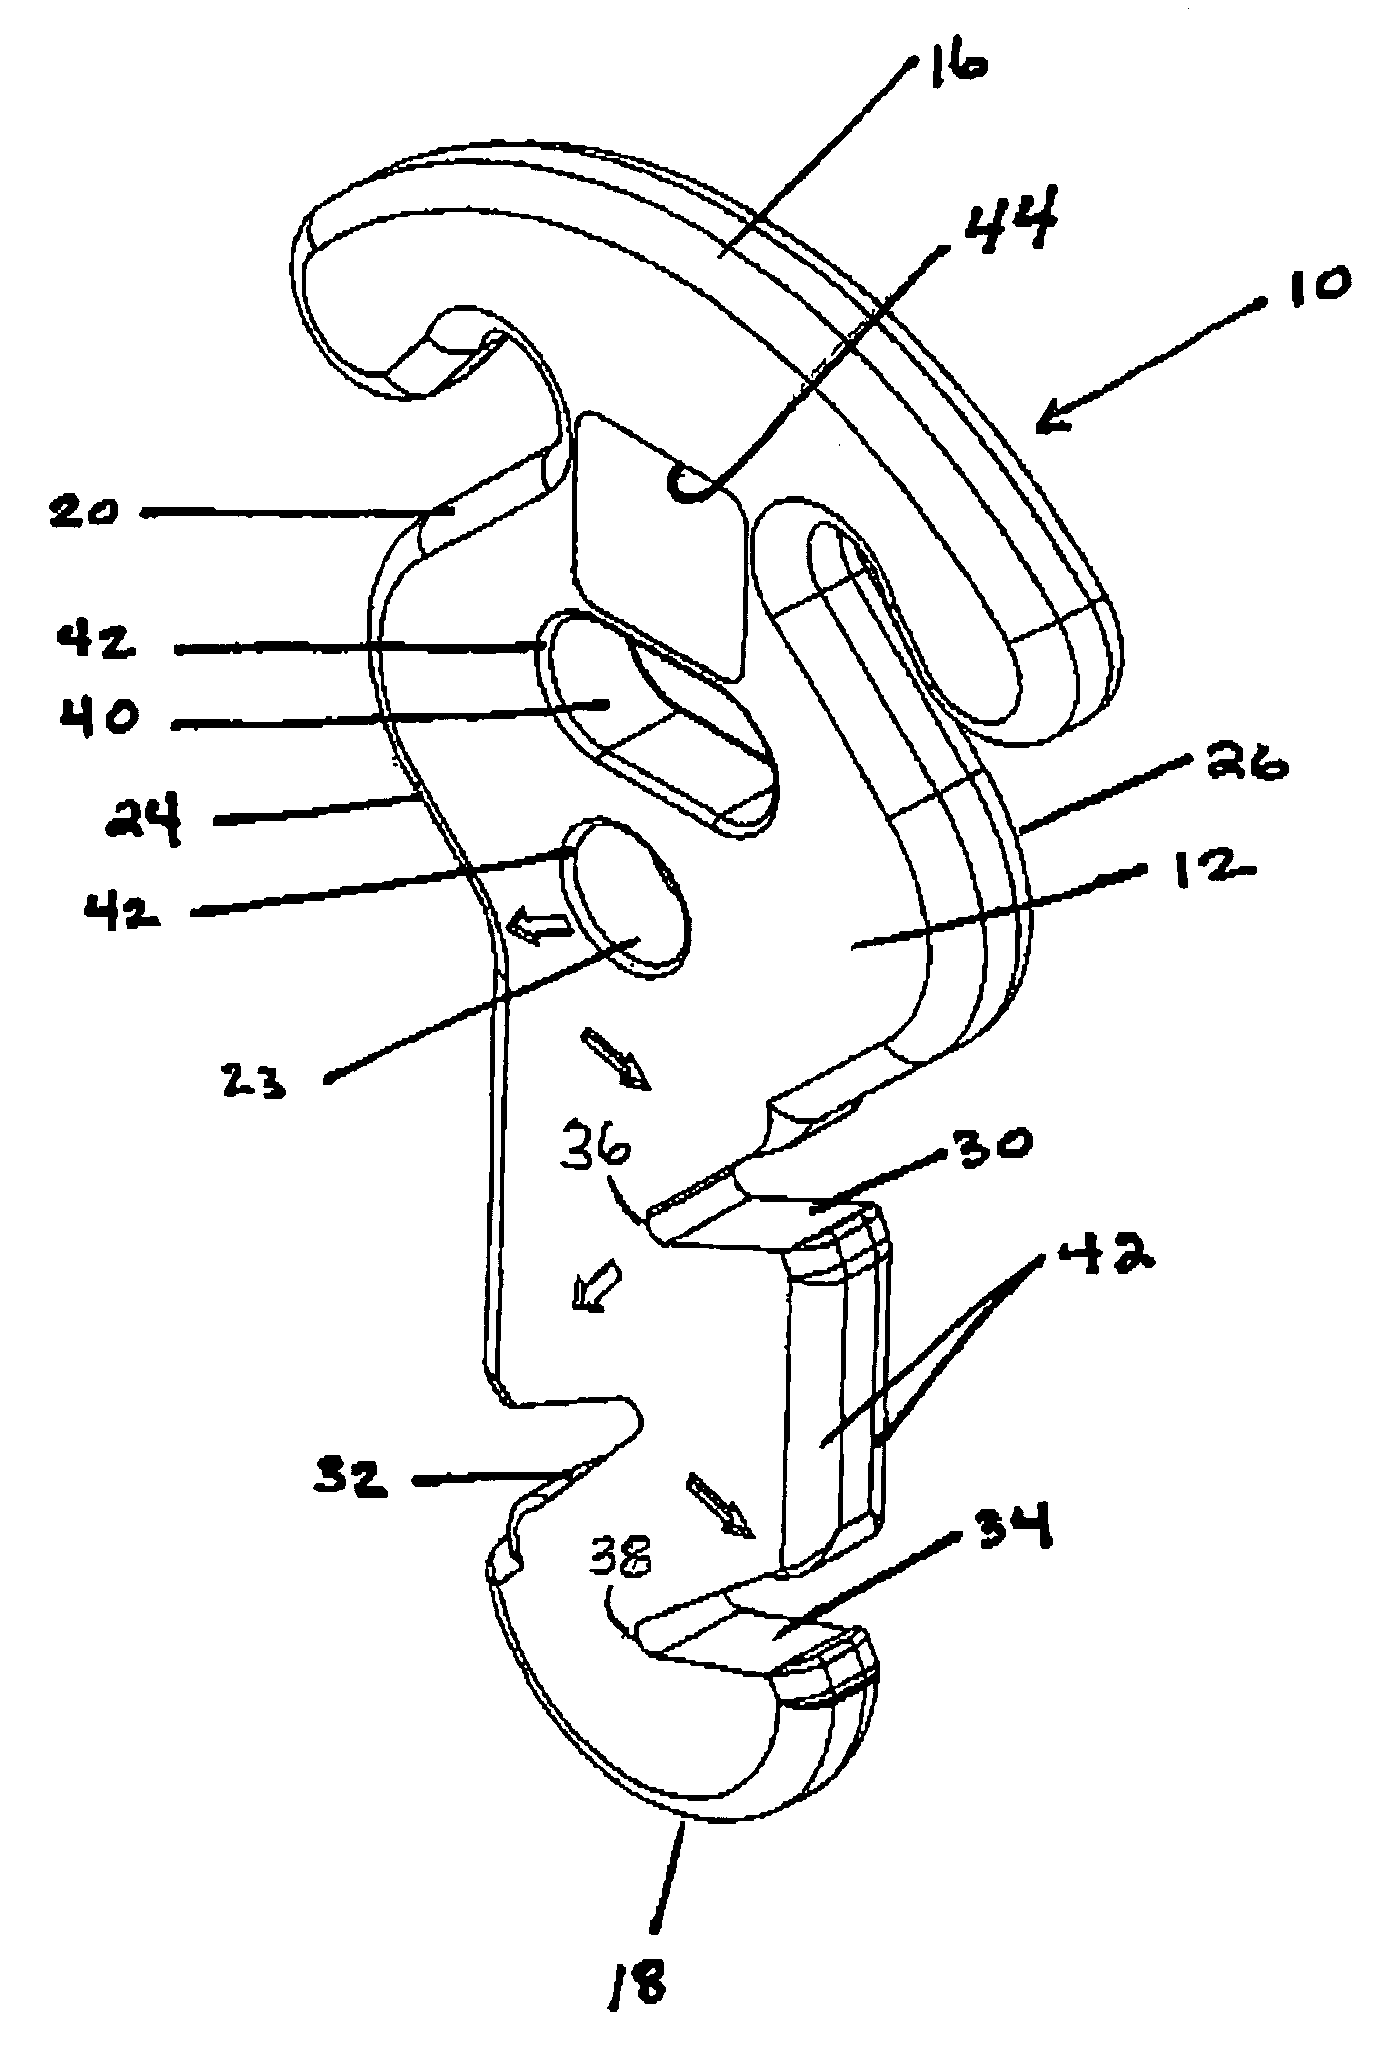 Line tensioning and coupling apparatus